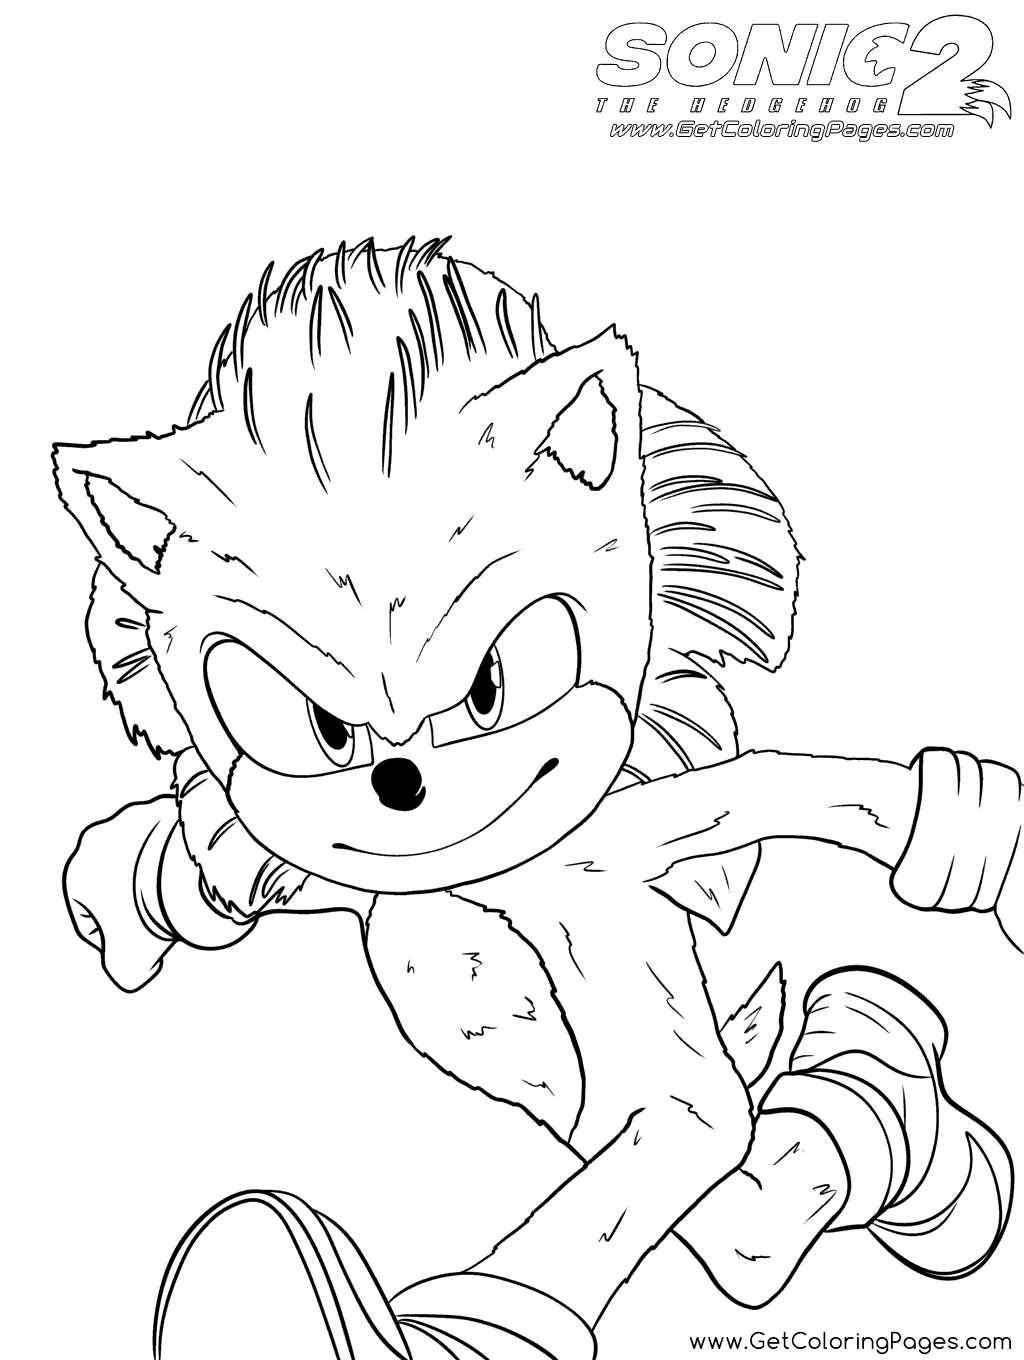 Sonic in sonic the hedgehog coloring pages printable coloring pages free printable coloring pages